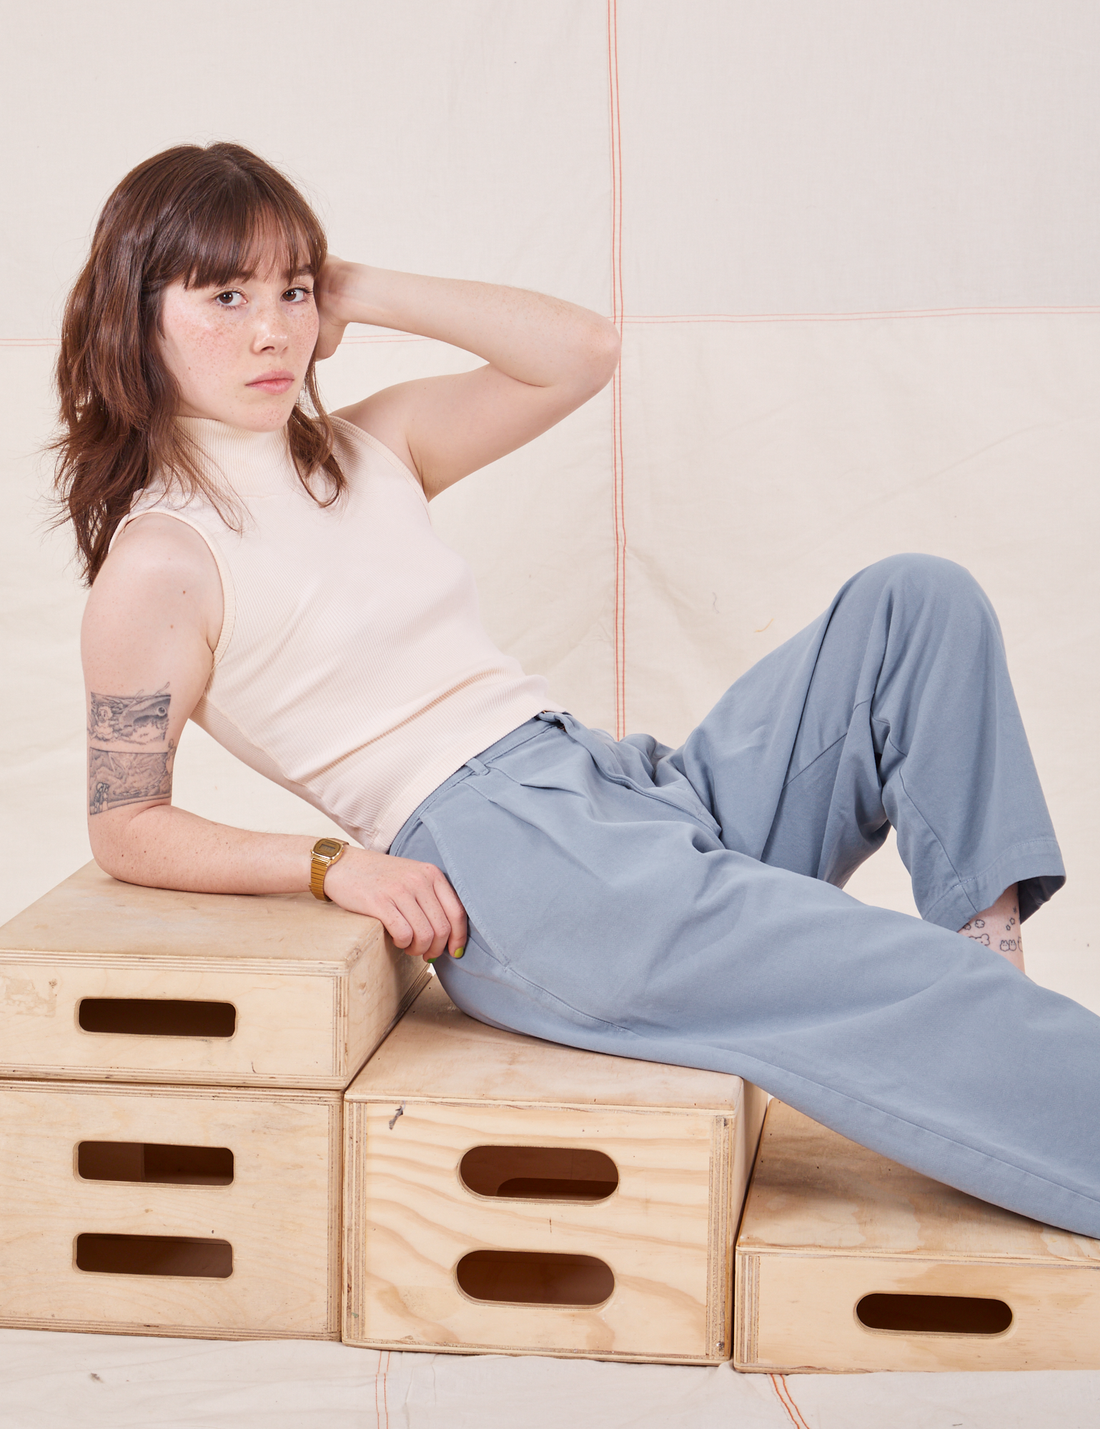 Hana is wearing Organic Trousers in Periwinkle and vintage off-white Sleeveless Essential Turtleneck